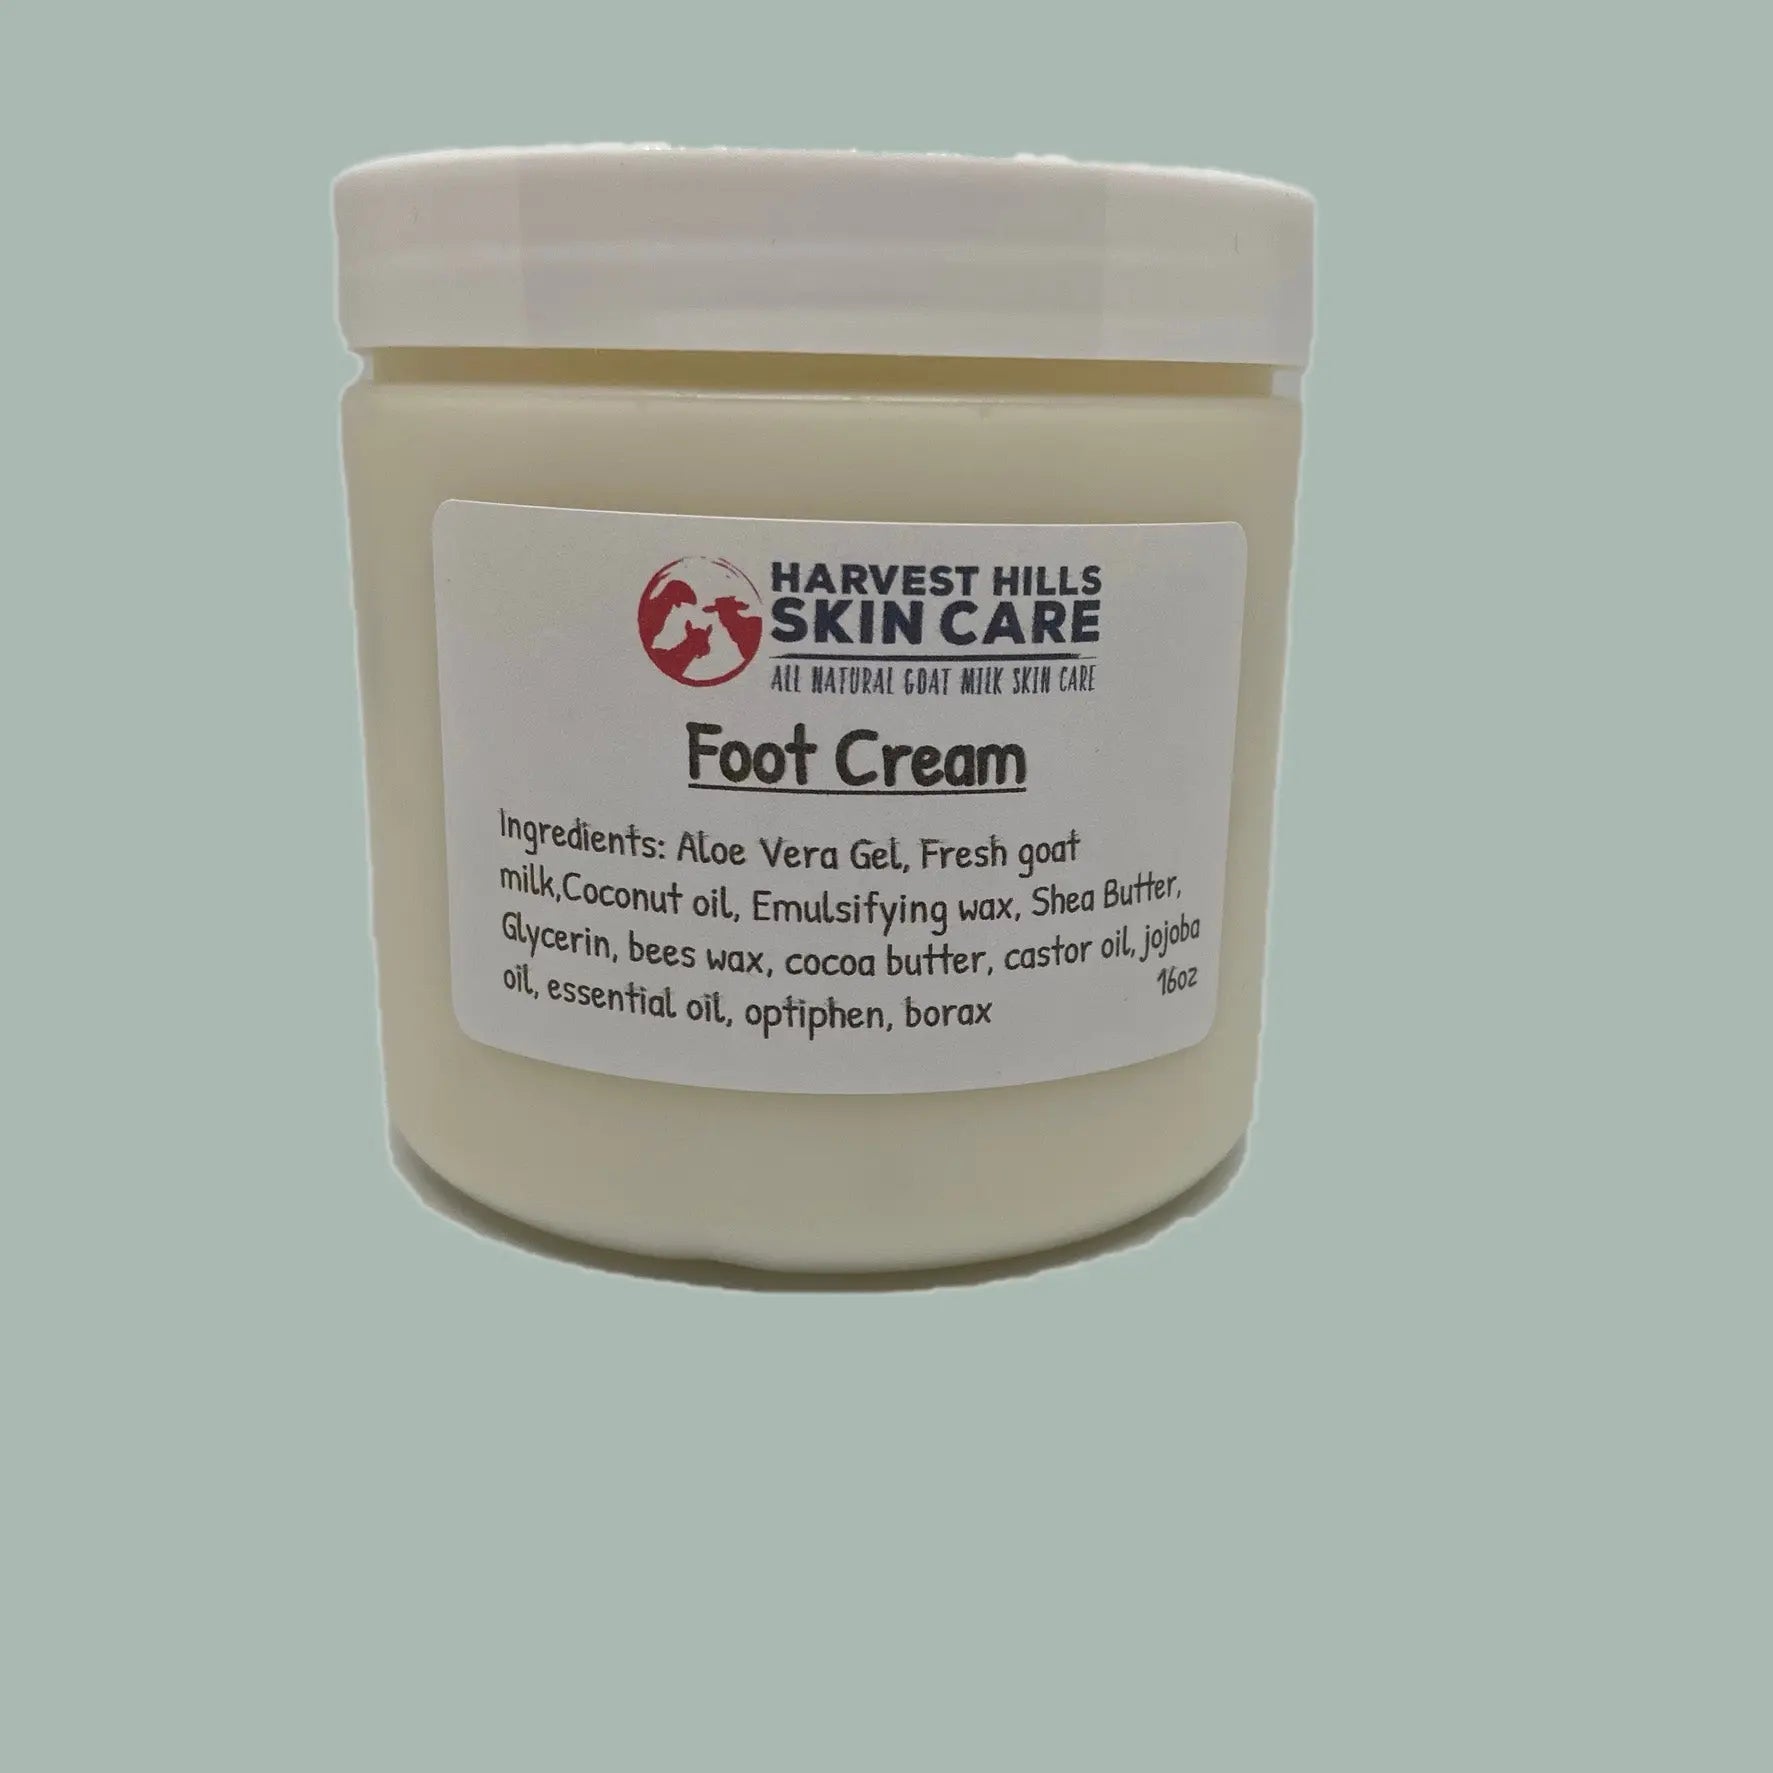 Foot Cream - Refills available Harvest Hills Skin Care All Natural Goat Milk Skin Care